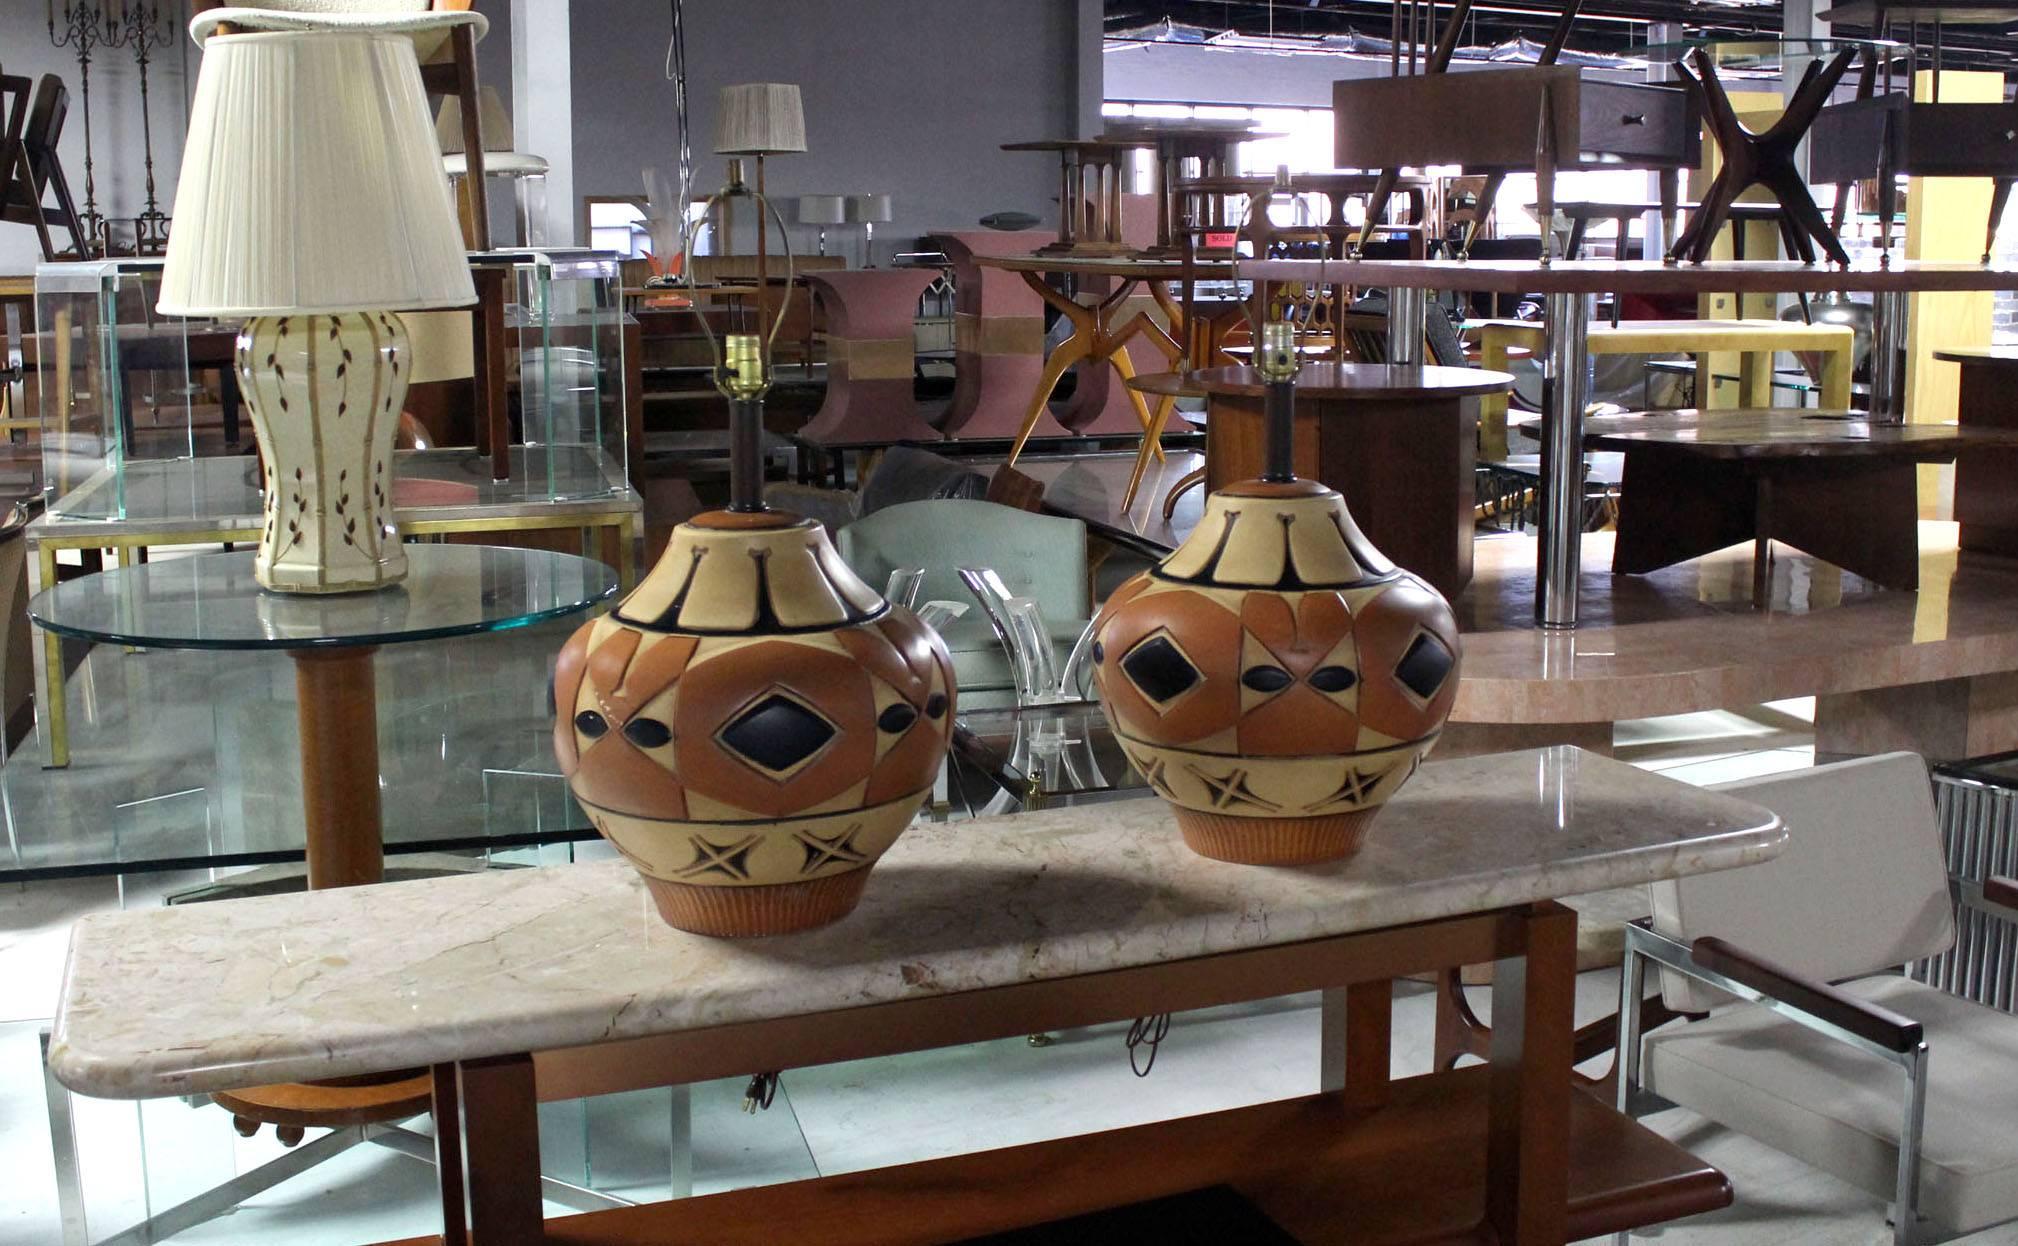 Pair of Mid-Century Modern art pottery table lamps.